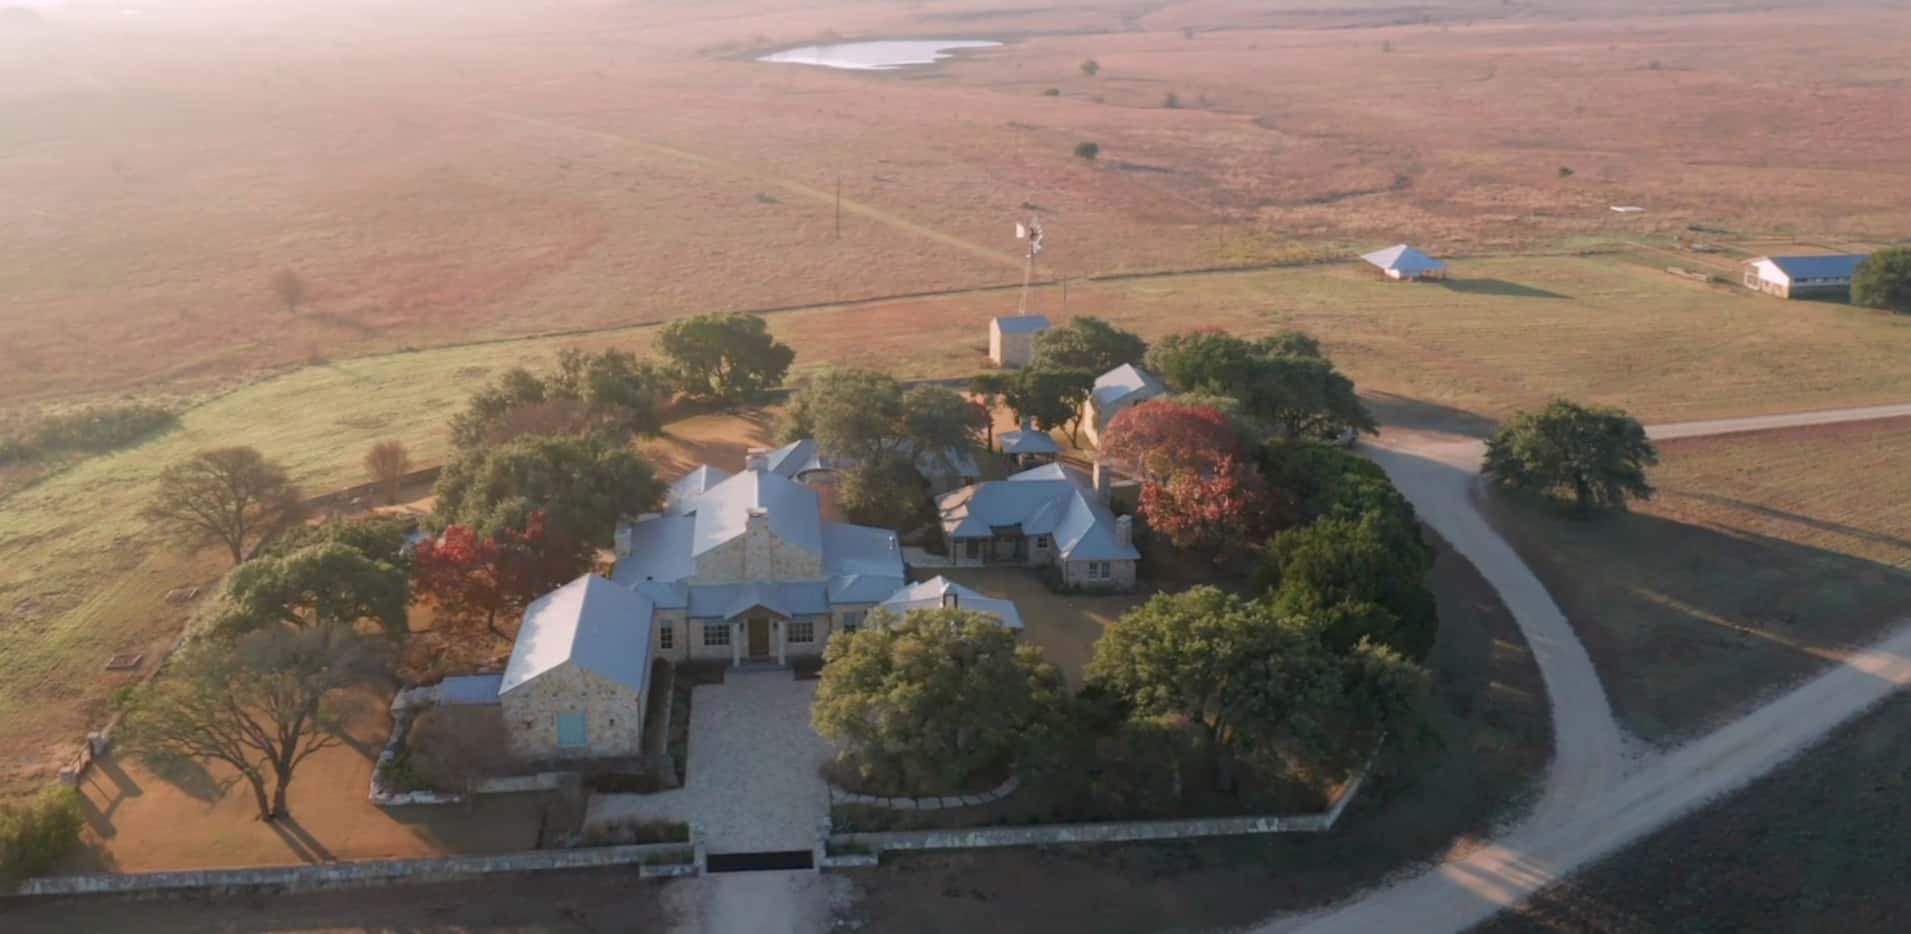 The Rocosa Ridge Ranch includes a large residential compound with new and historic buildings.